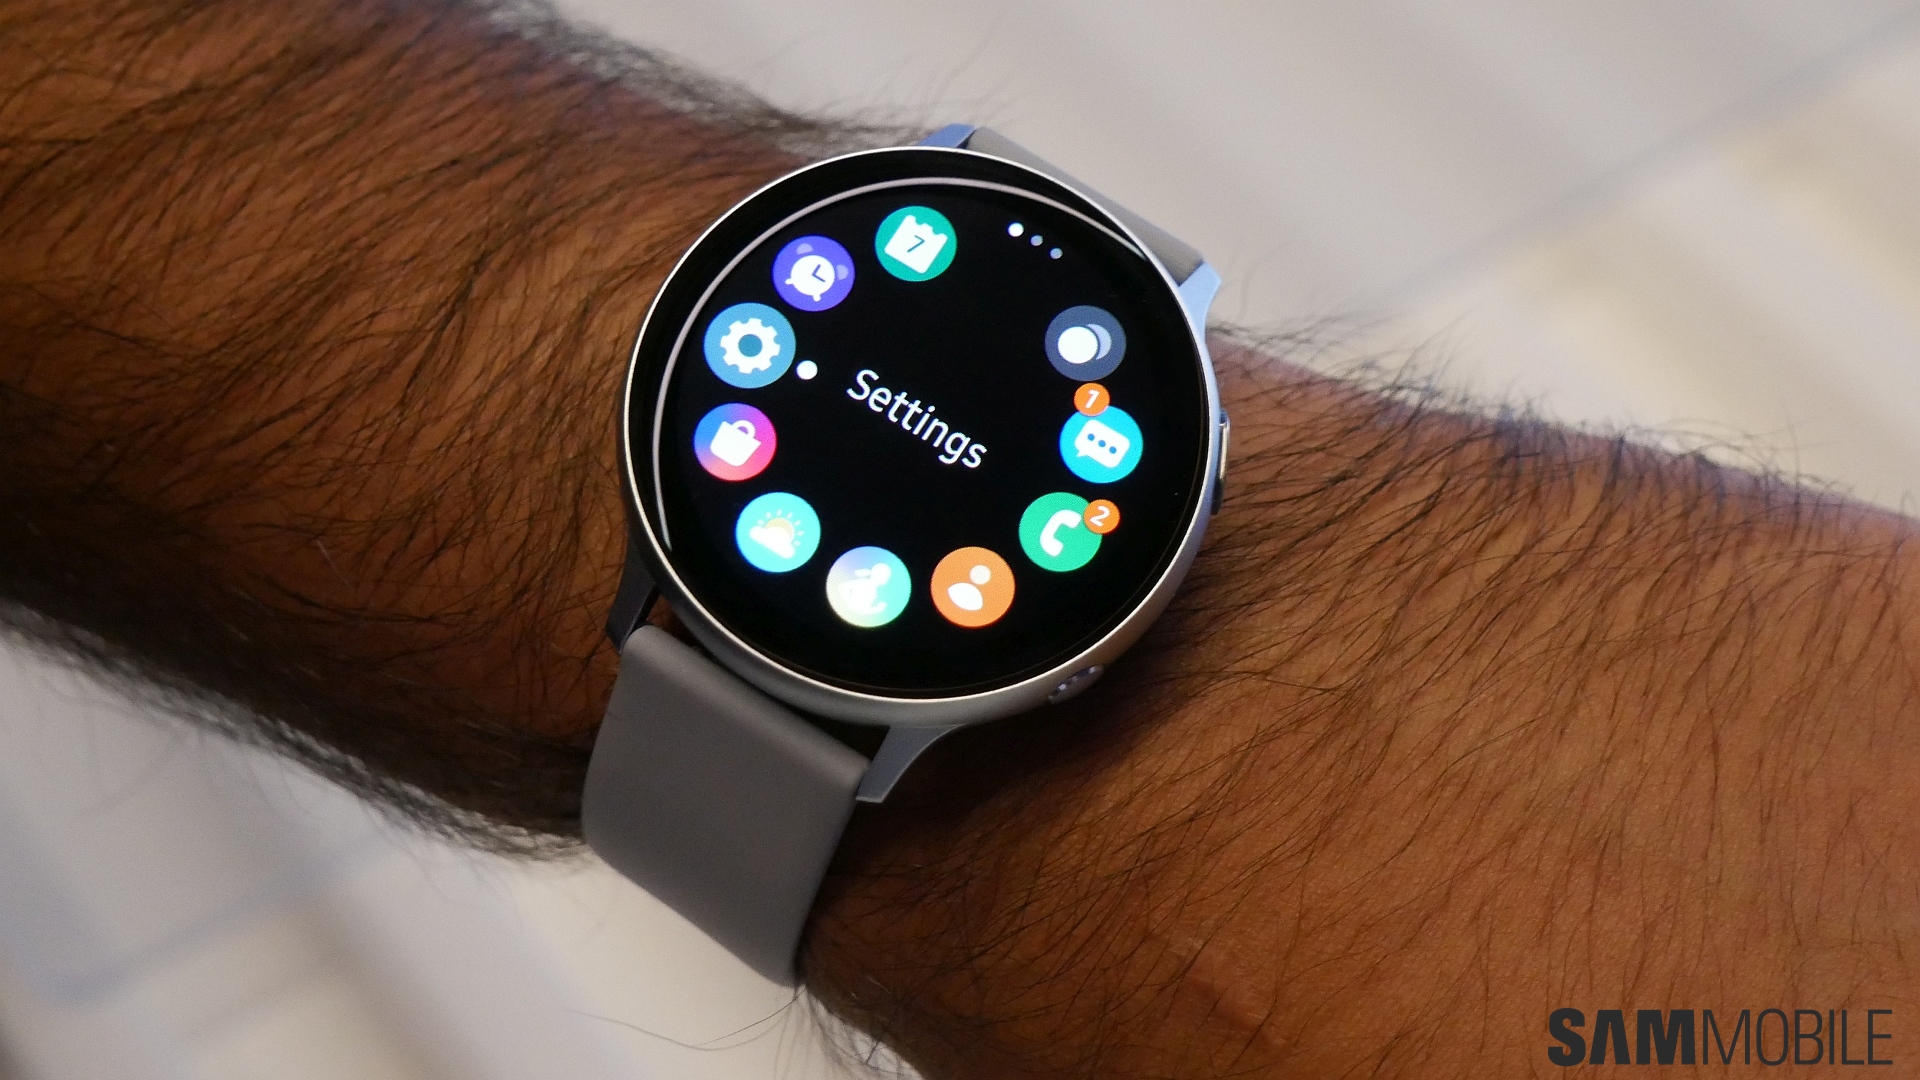 Samsung Galaxy Watch Active 2 hands-on: It'll touch your heart - SamMobile